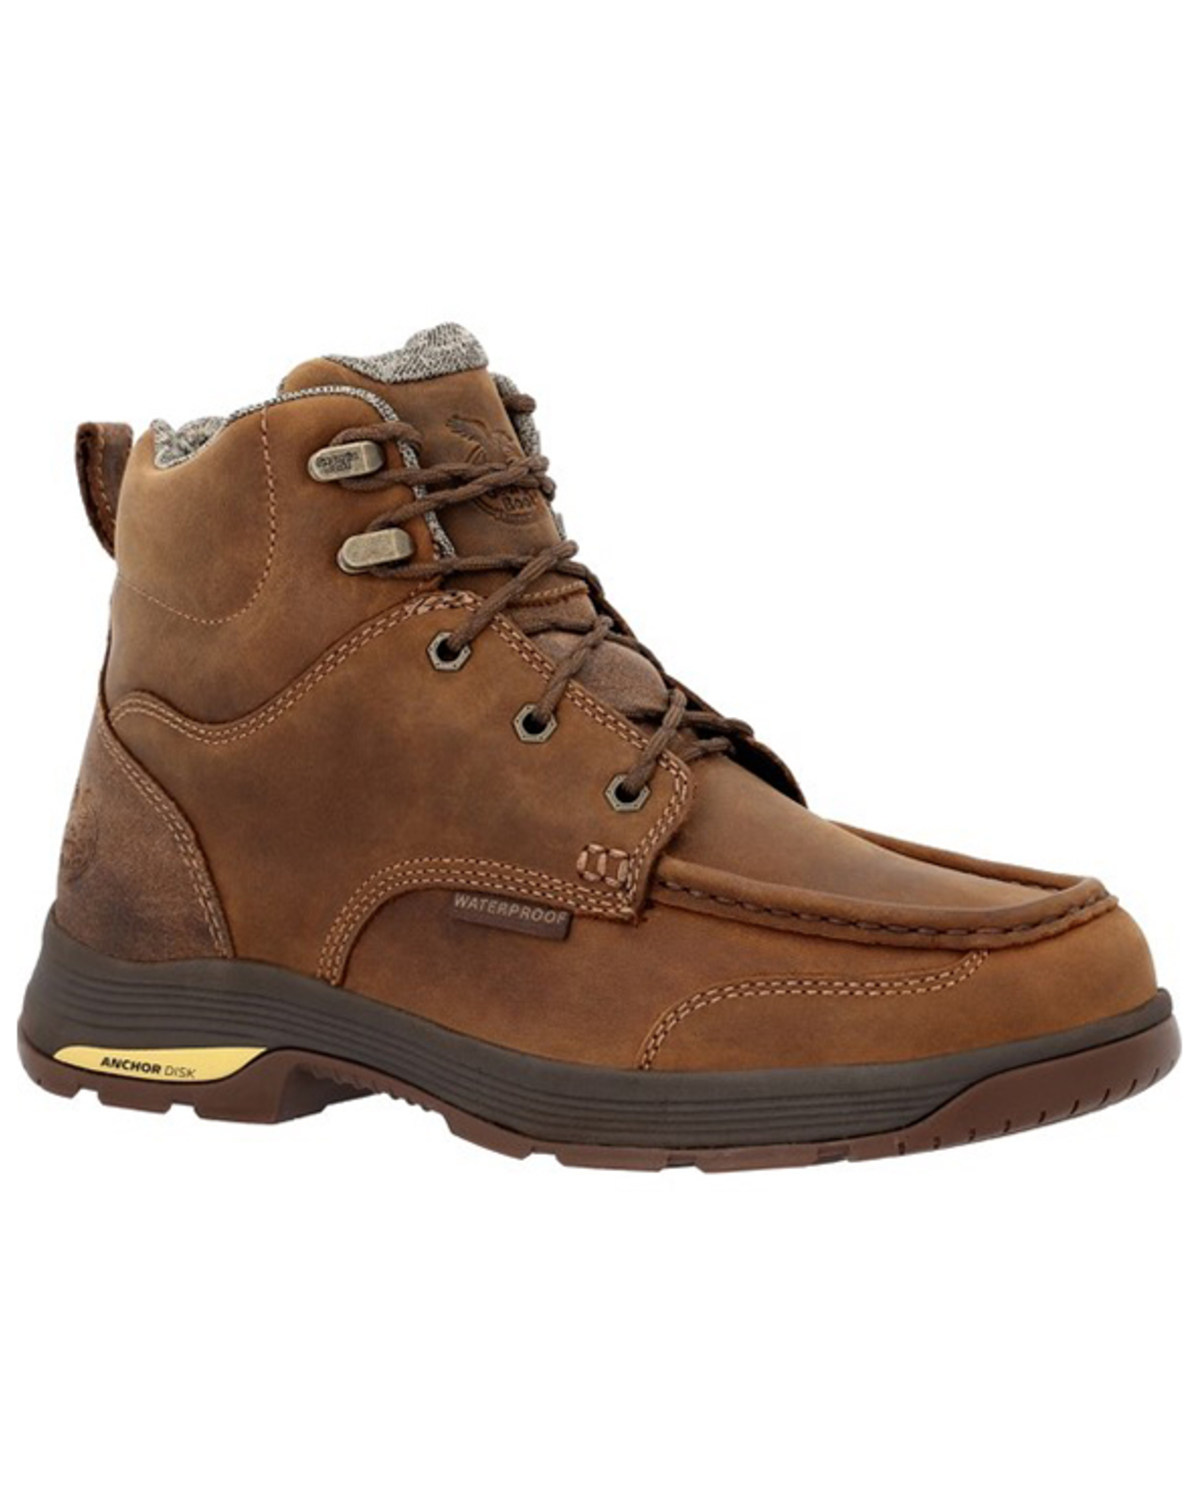 Georgia Men's Athens Superlyte Waterproof 6" Lace-Up Work Boots - Moc Toe